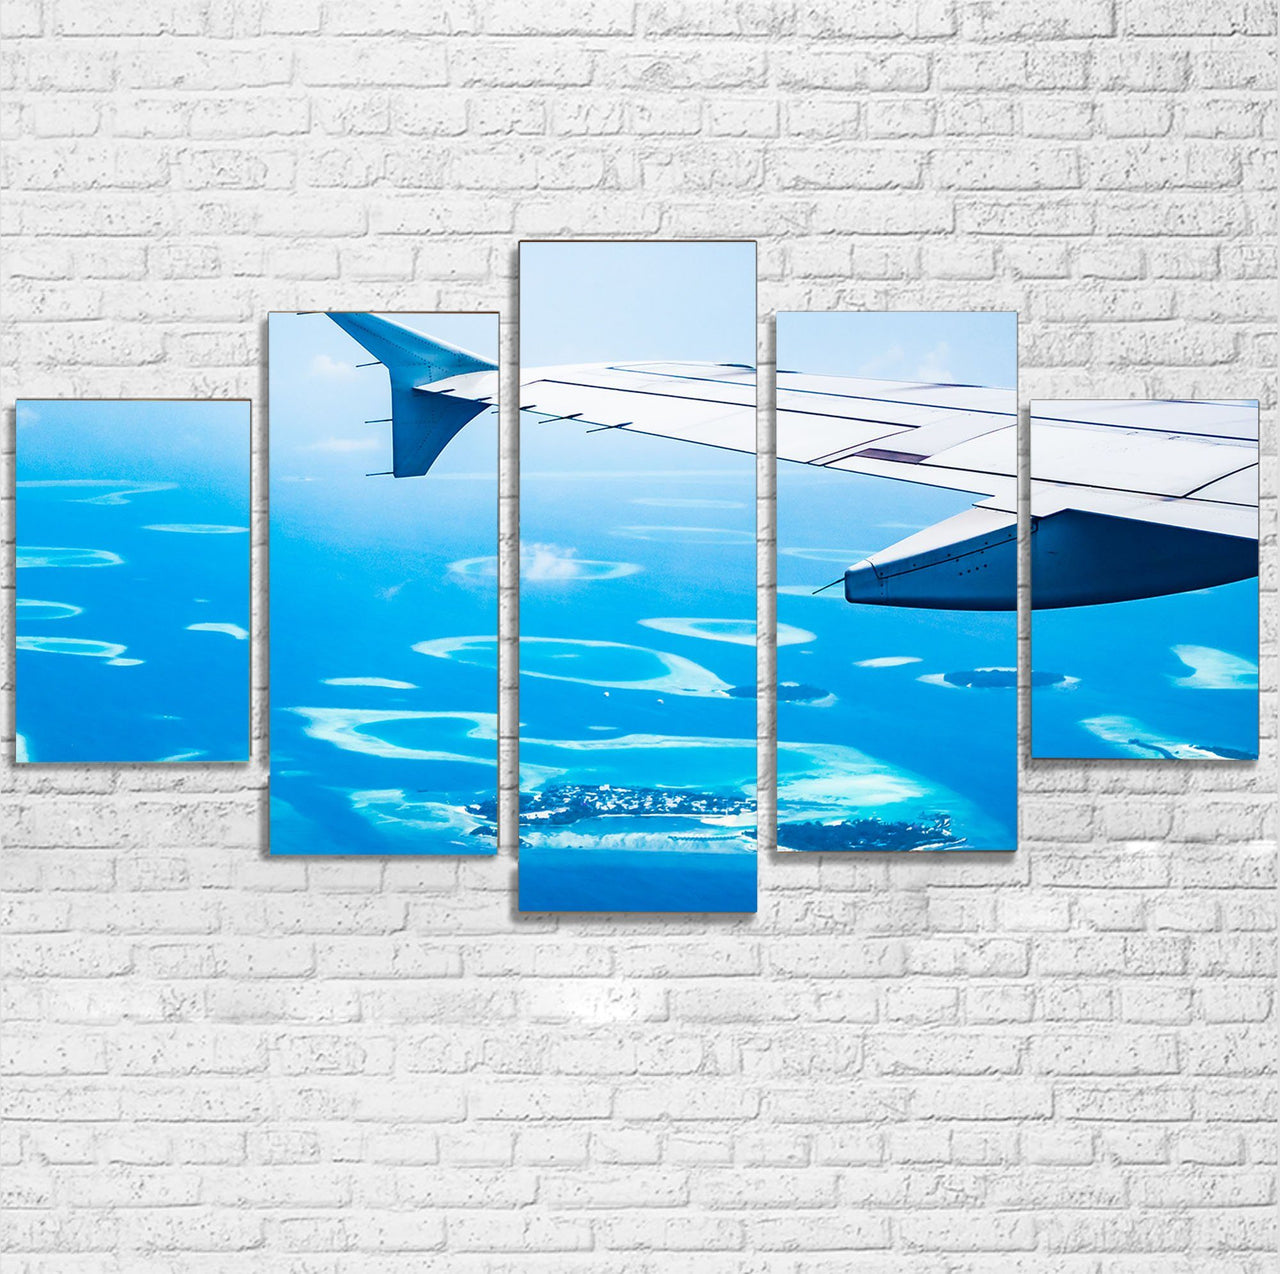 Outstanding View Through Airplane Wing Printed Multiple Canvas Poster Aviation Shop 